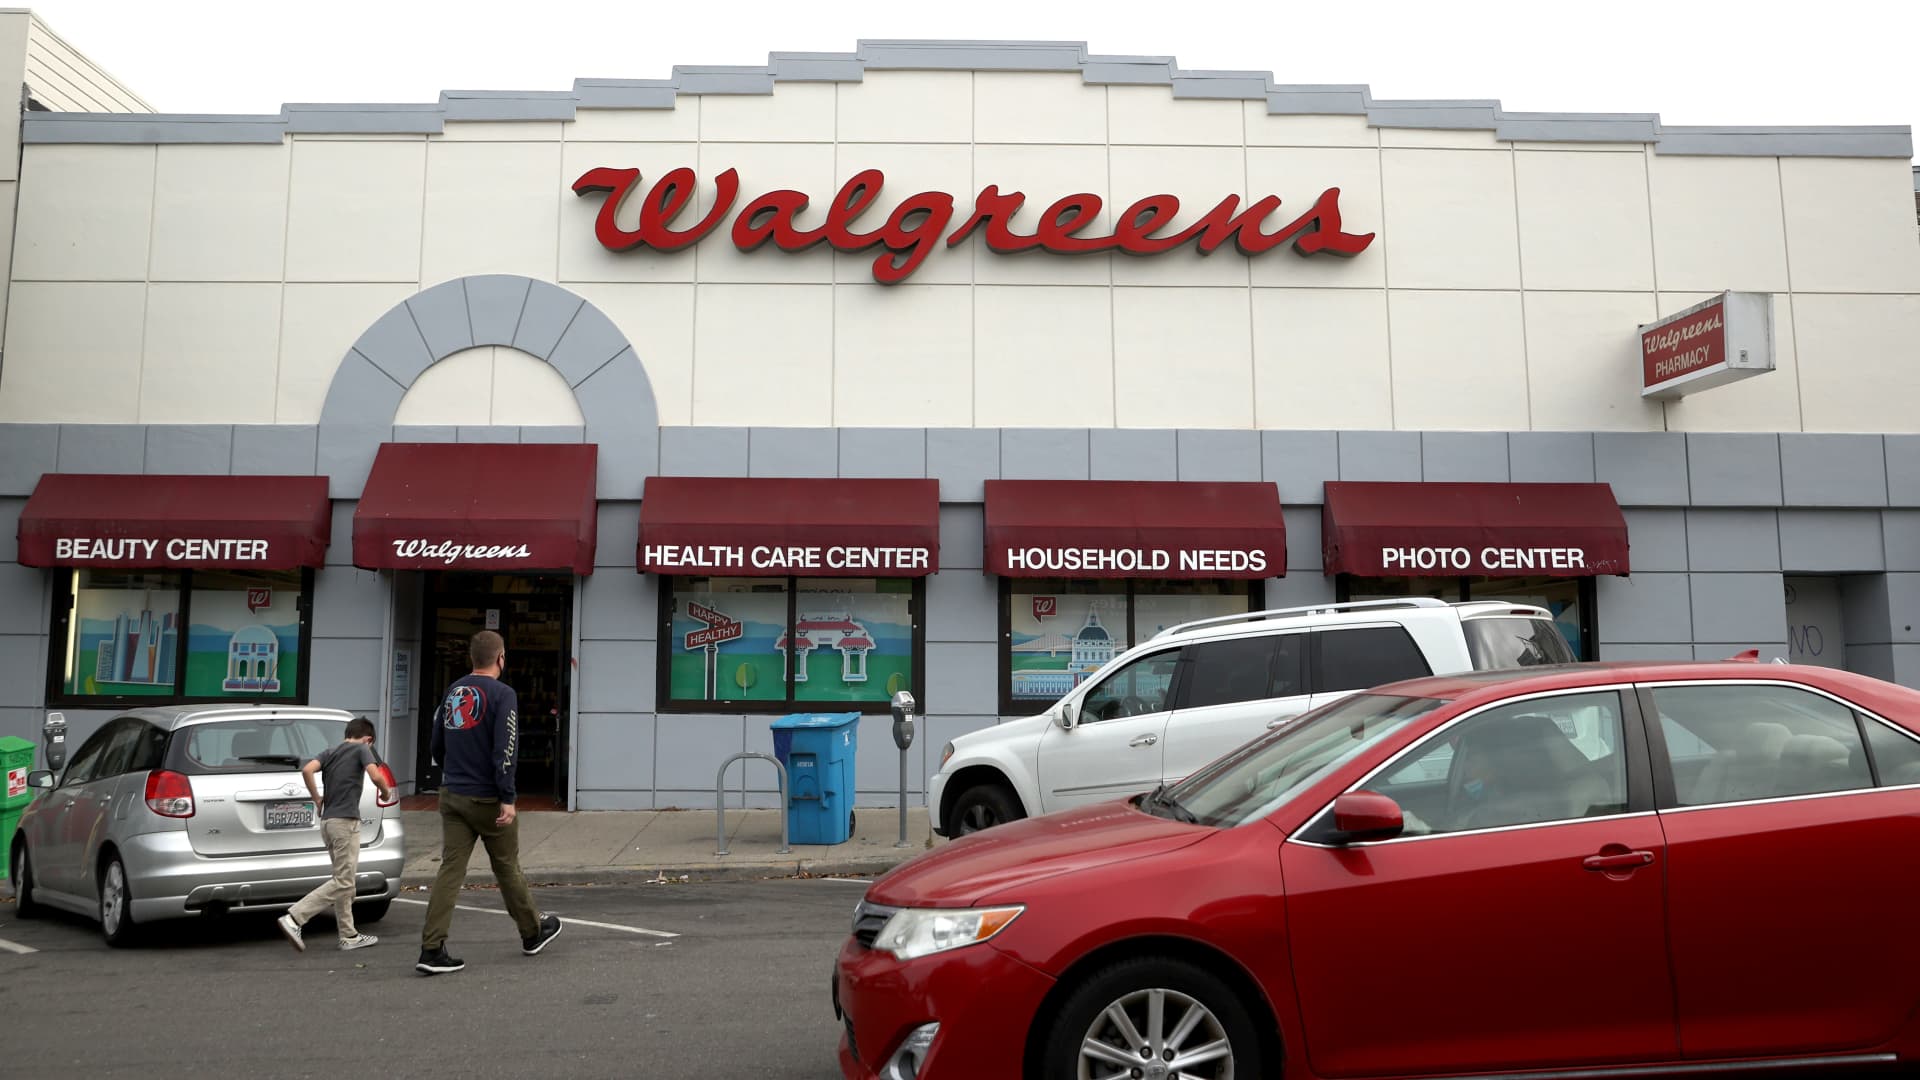 Walgreens, Amazon and Wawa find success with the most-overlooked unemployed worker